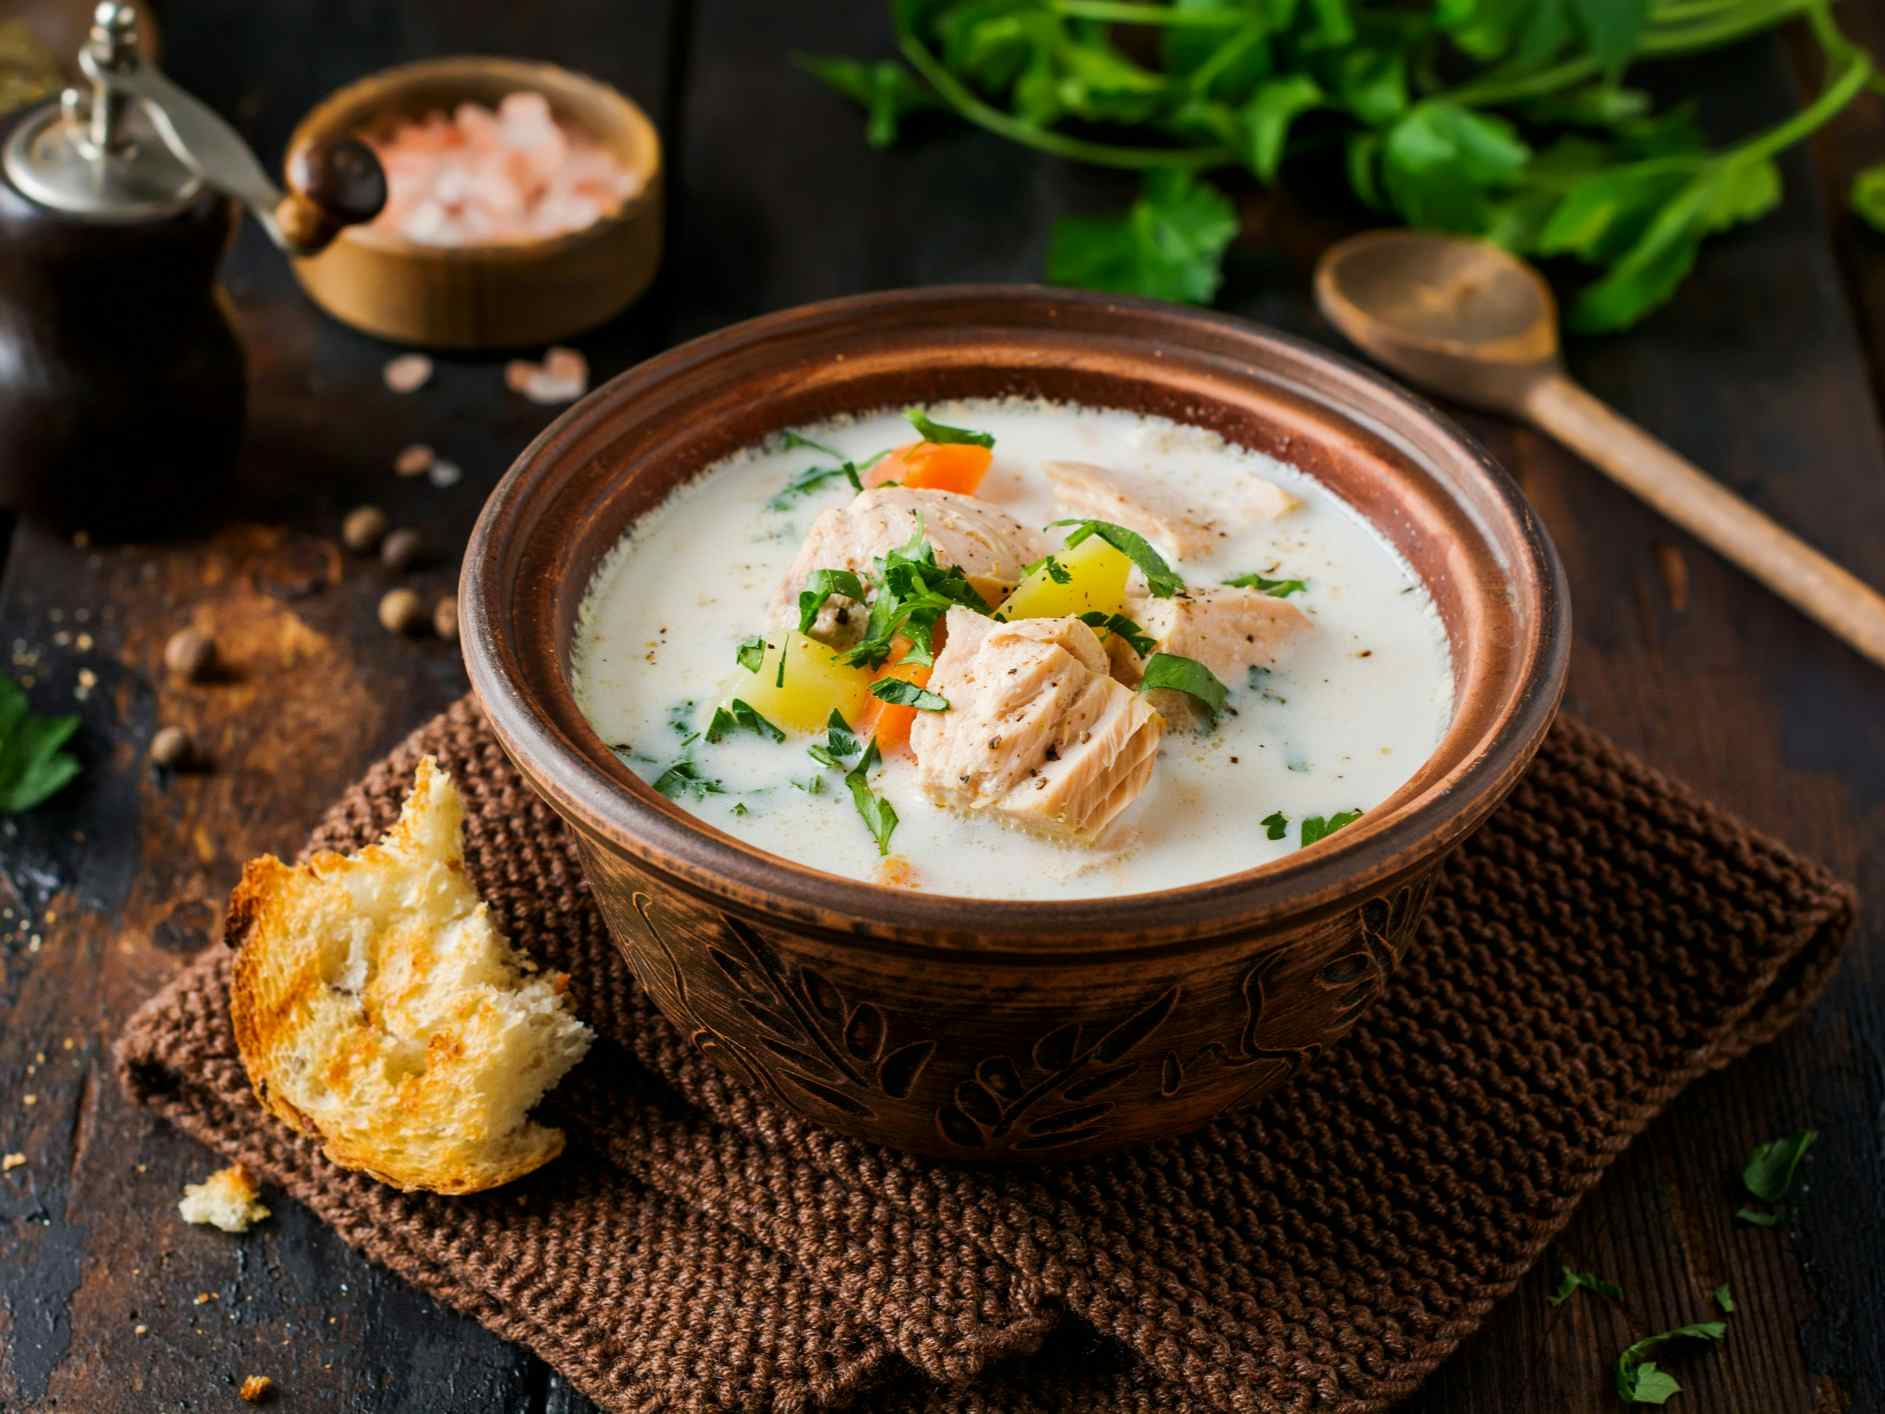 Warm Finnish creamy soup with salmon and vegetables.